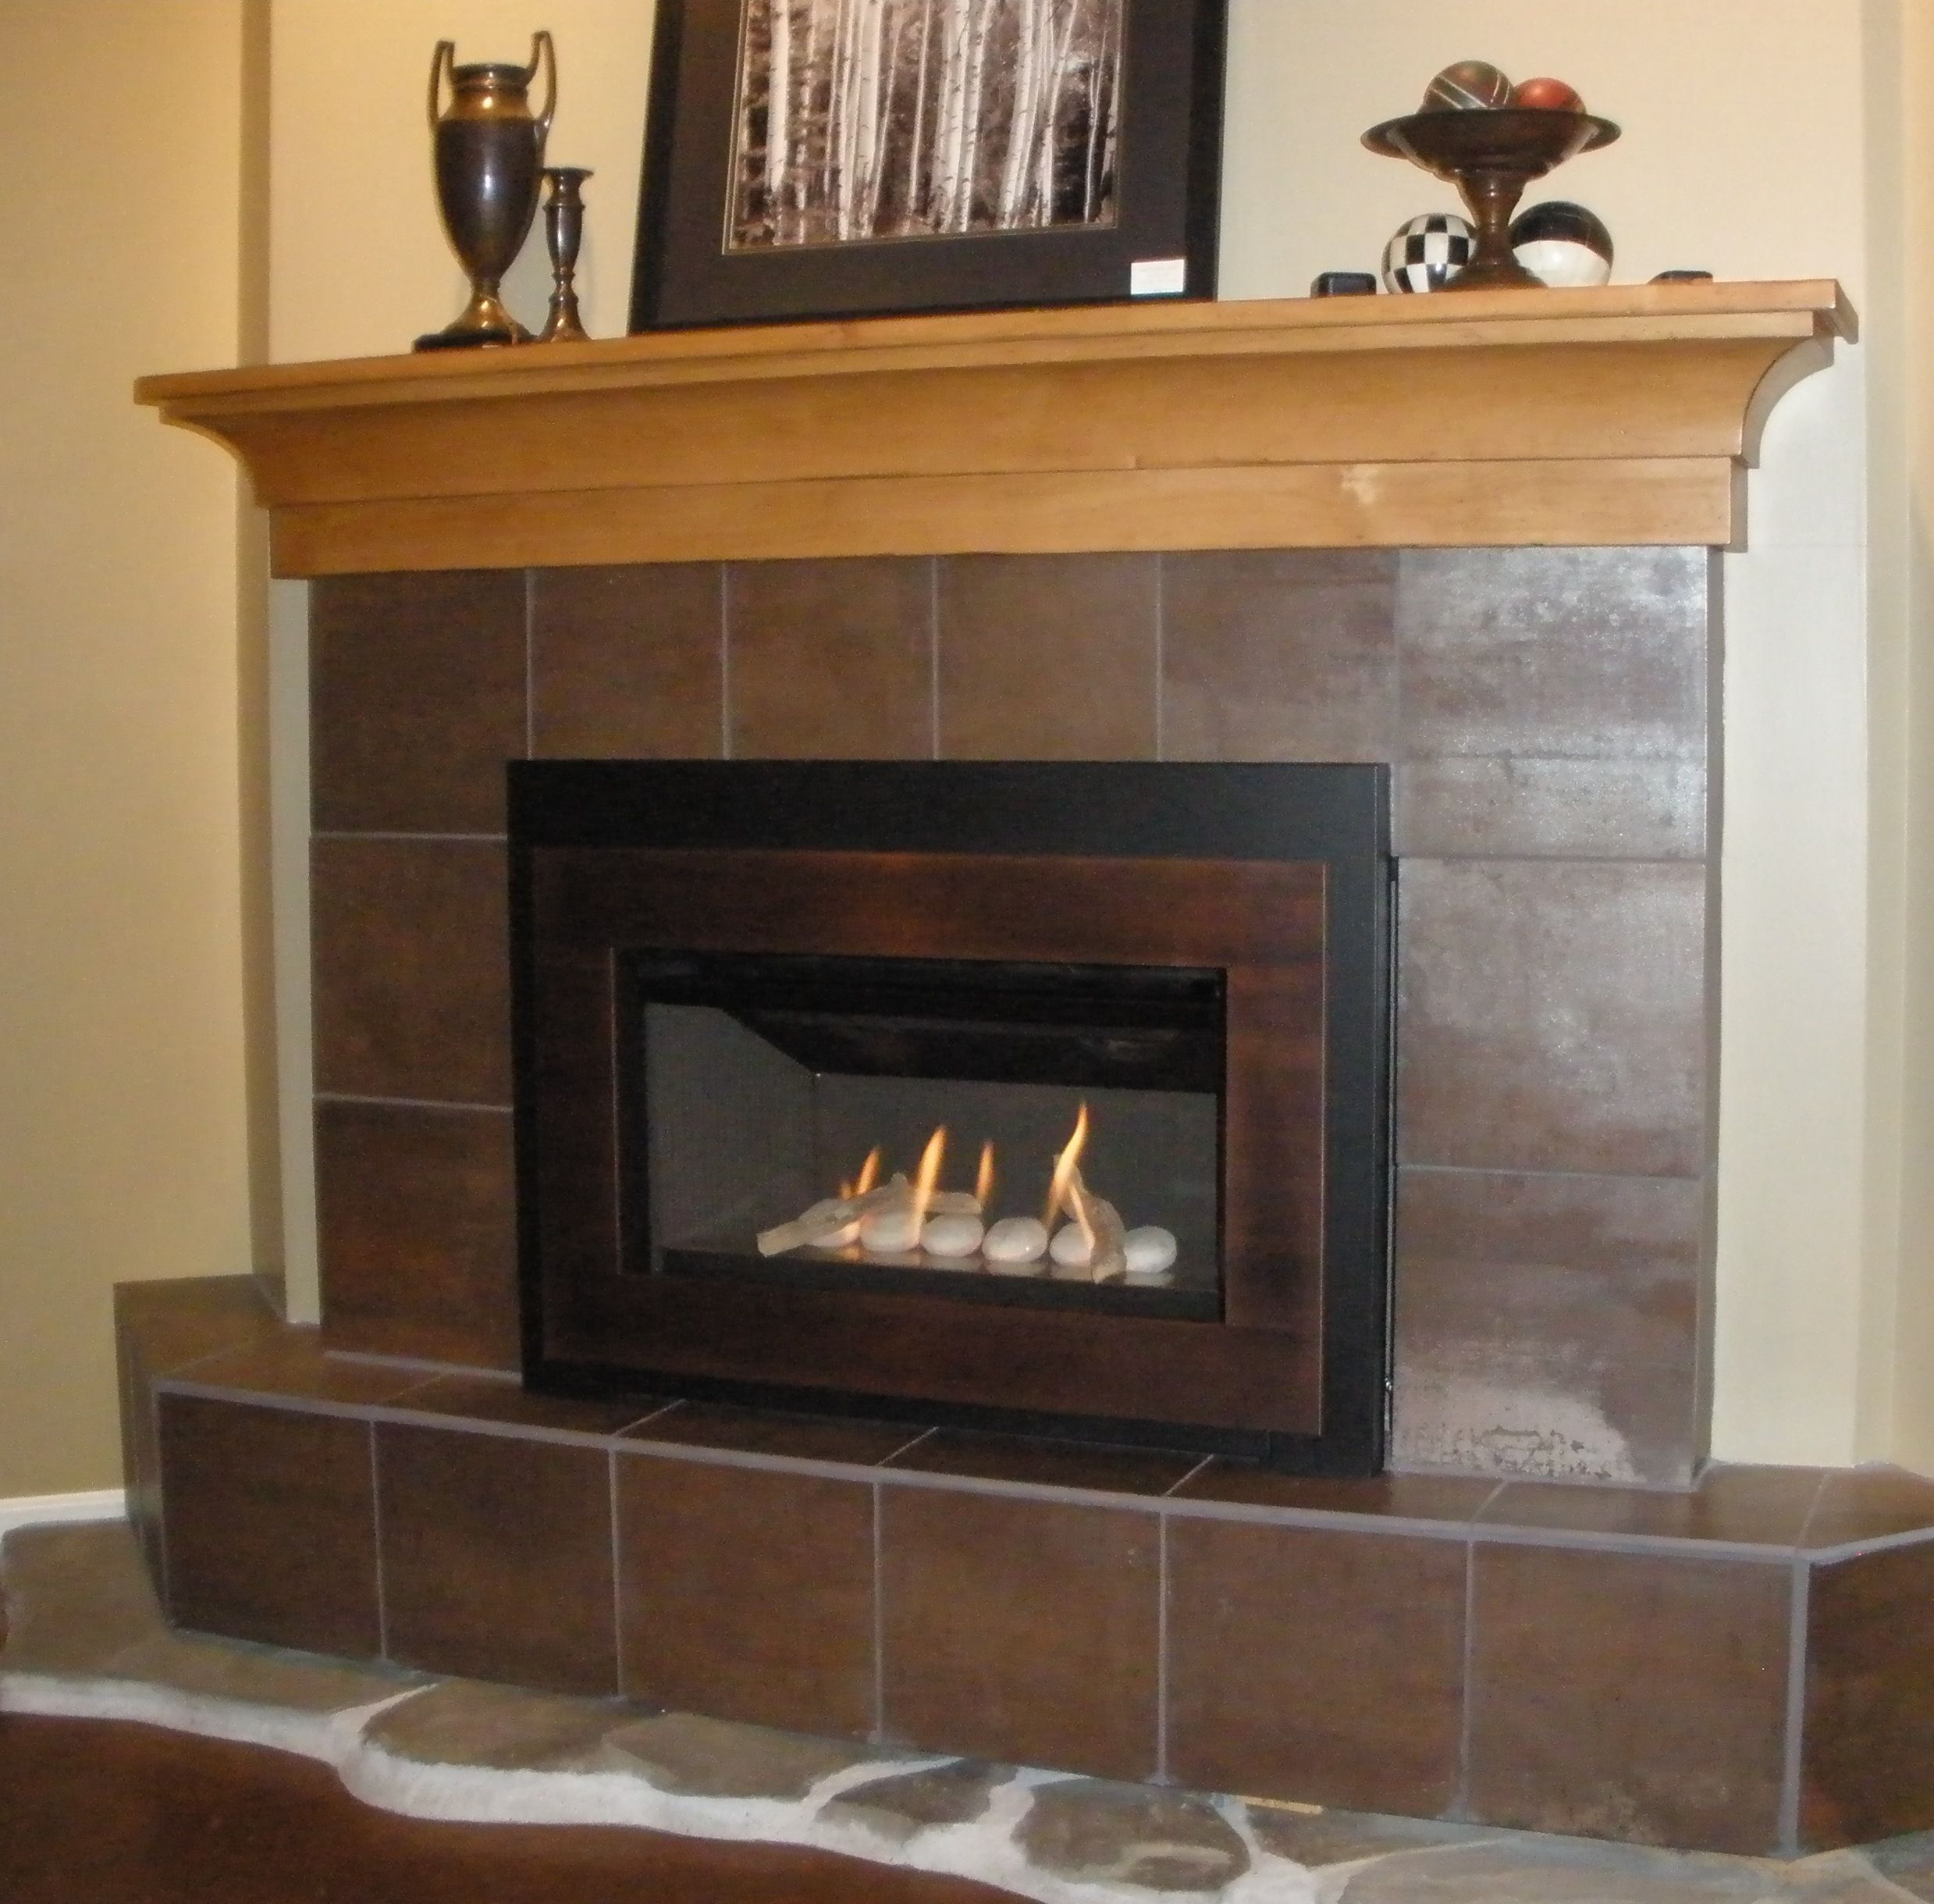 Heat and Glo Fireplace Inserts Unique Pin On Valor Radiant Gas Fireplaces Midwest Dealer